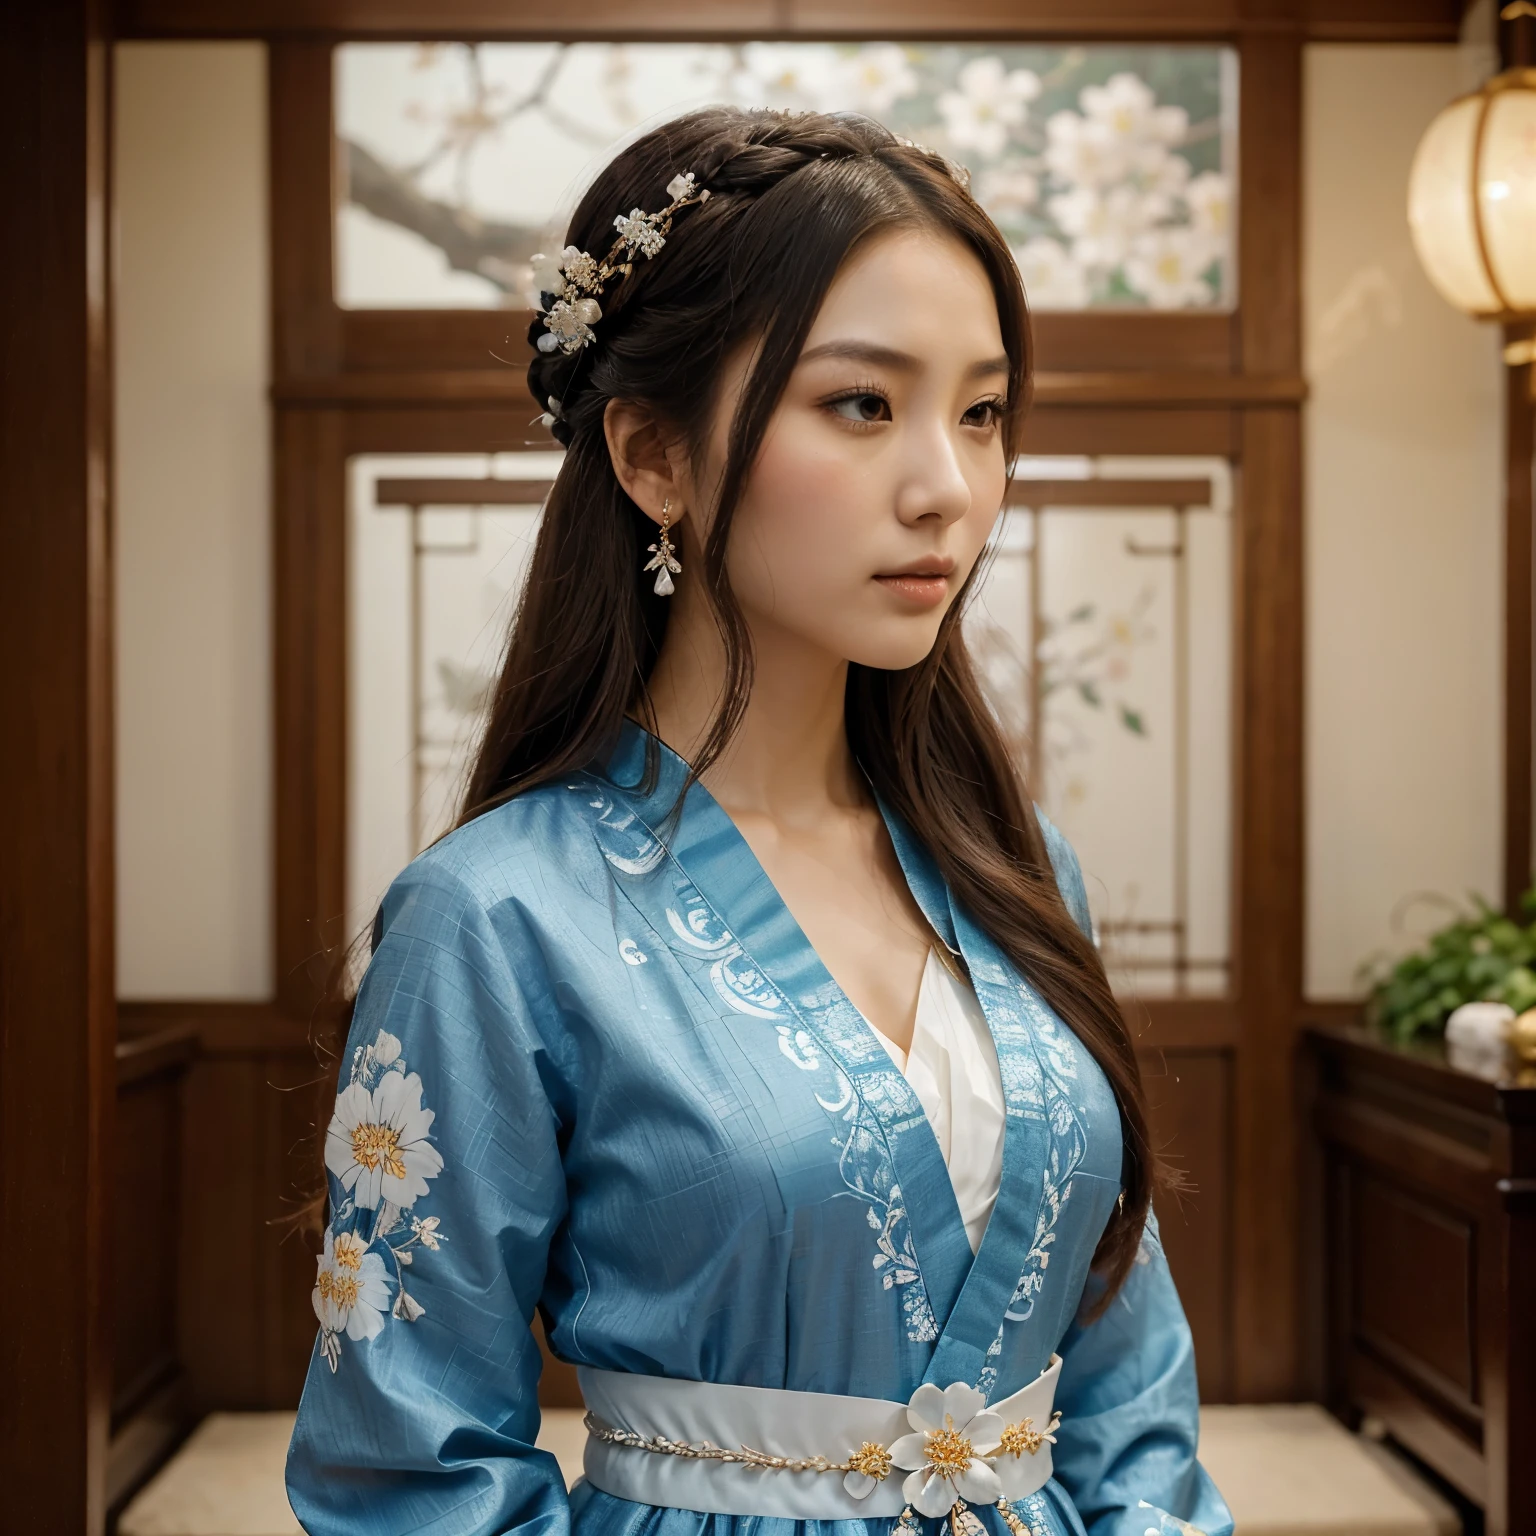 The figure is a woman portrayed in a graceful pose with a serene and contemplative expression. Her attire and styling suggest traditional East Asian influences, likely a form of hanfu with its flowing layers and intricate patterns. The garment is detailed with floral patterns in shades of blue and white, which may represent a specific type of porcelain design. The use of blue is prominent, suggesting a connection to nobility or serenity in some East Asian cultures. The woman's hair is long, flowing, and styled traditionally with ornaments that include flowers and hanging beads or jewels. These hair accessories are elaborate, adding to the sense of elegance and refinement.